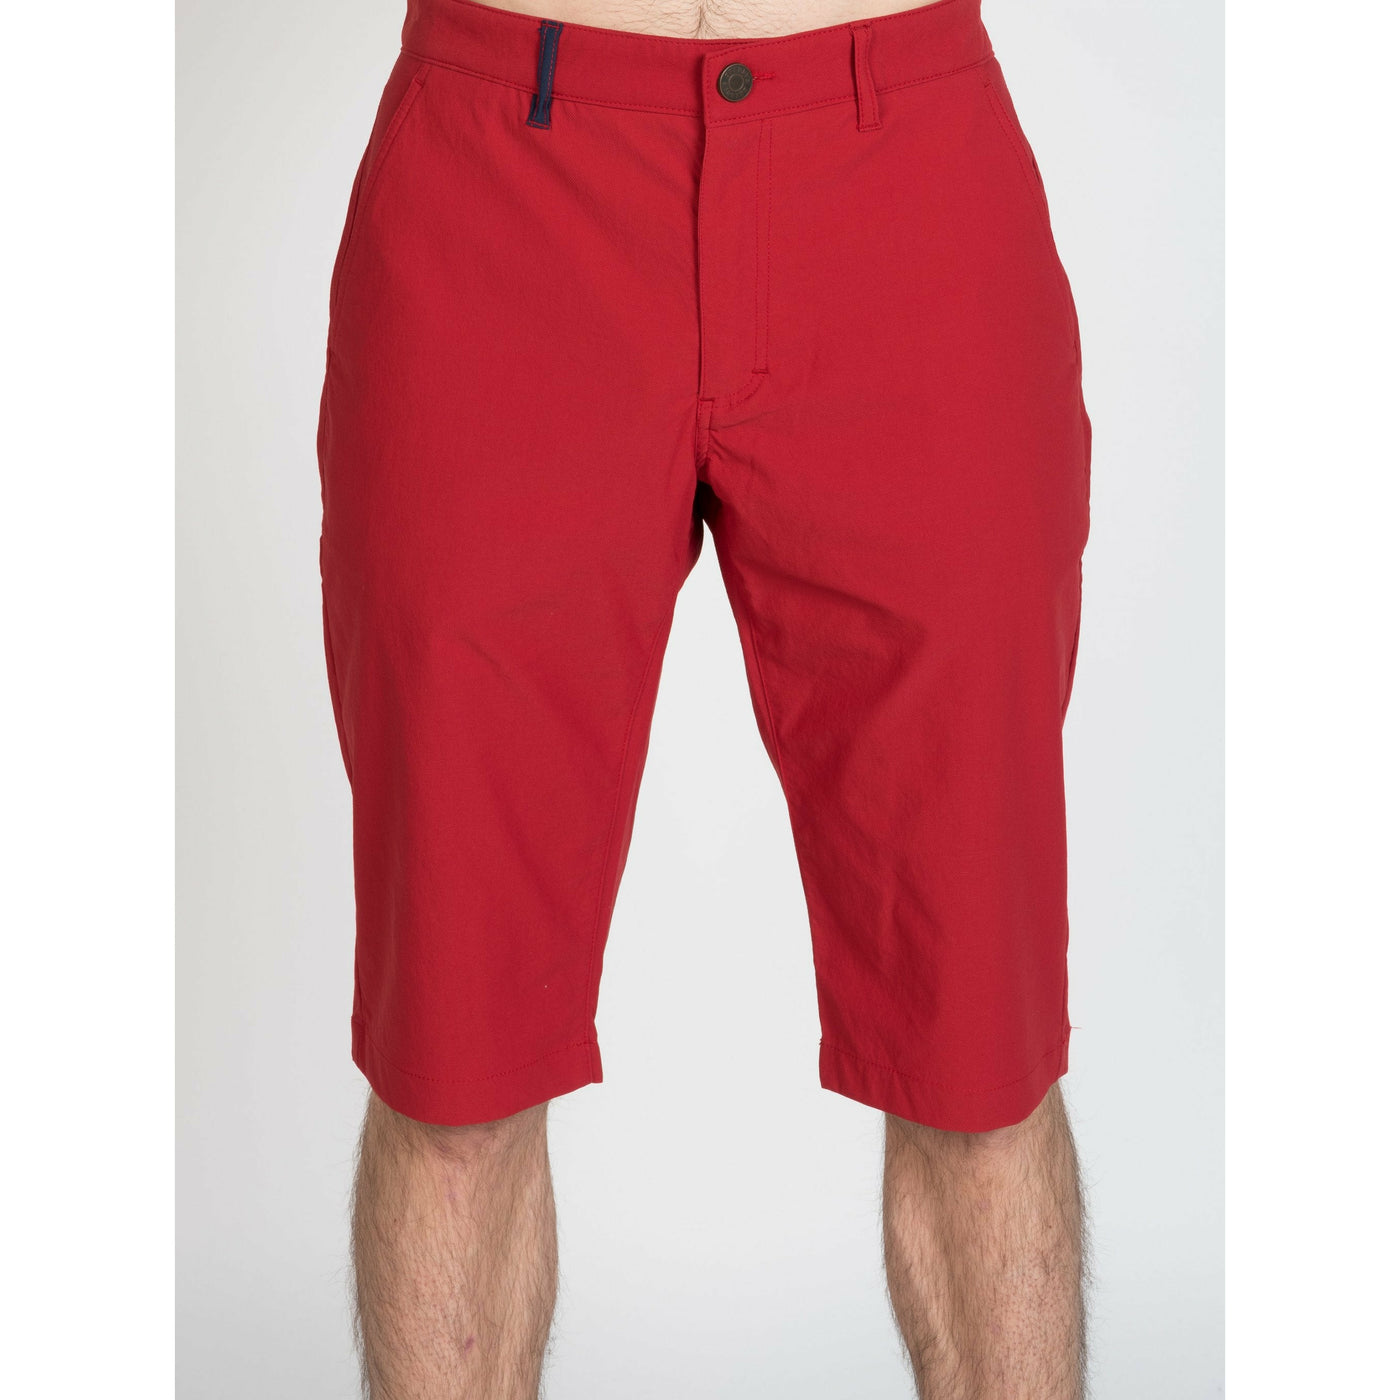 BREDDY'S - shorts L.A. Basic #farbe_red